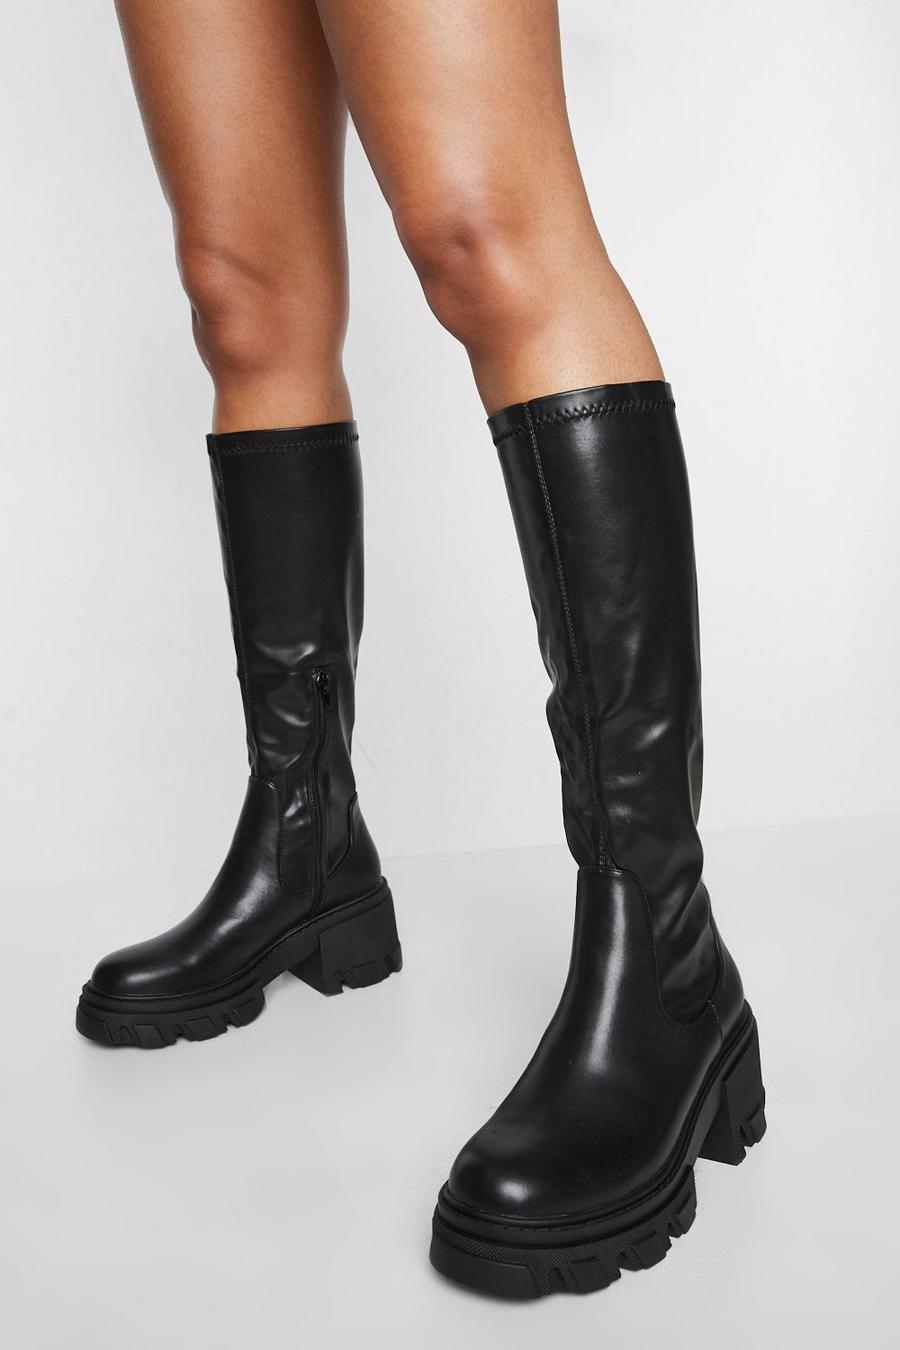 Black Calf High Chunky Heeled Boots image number 1